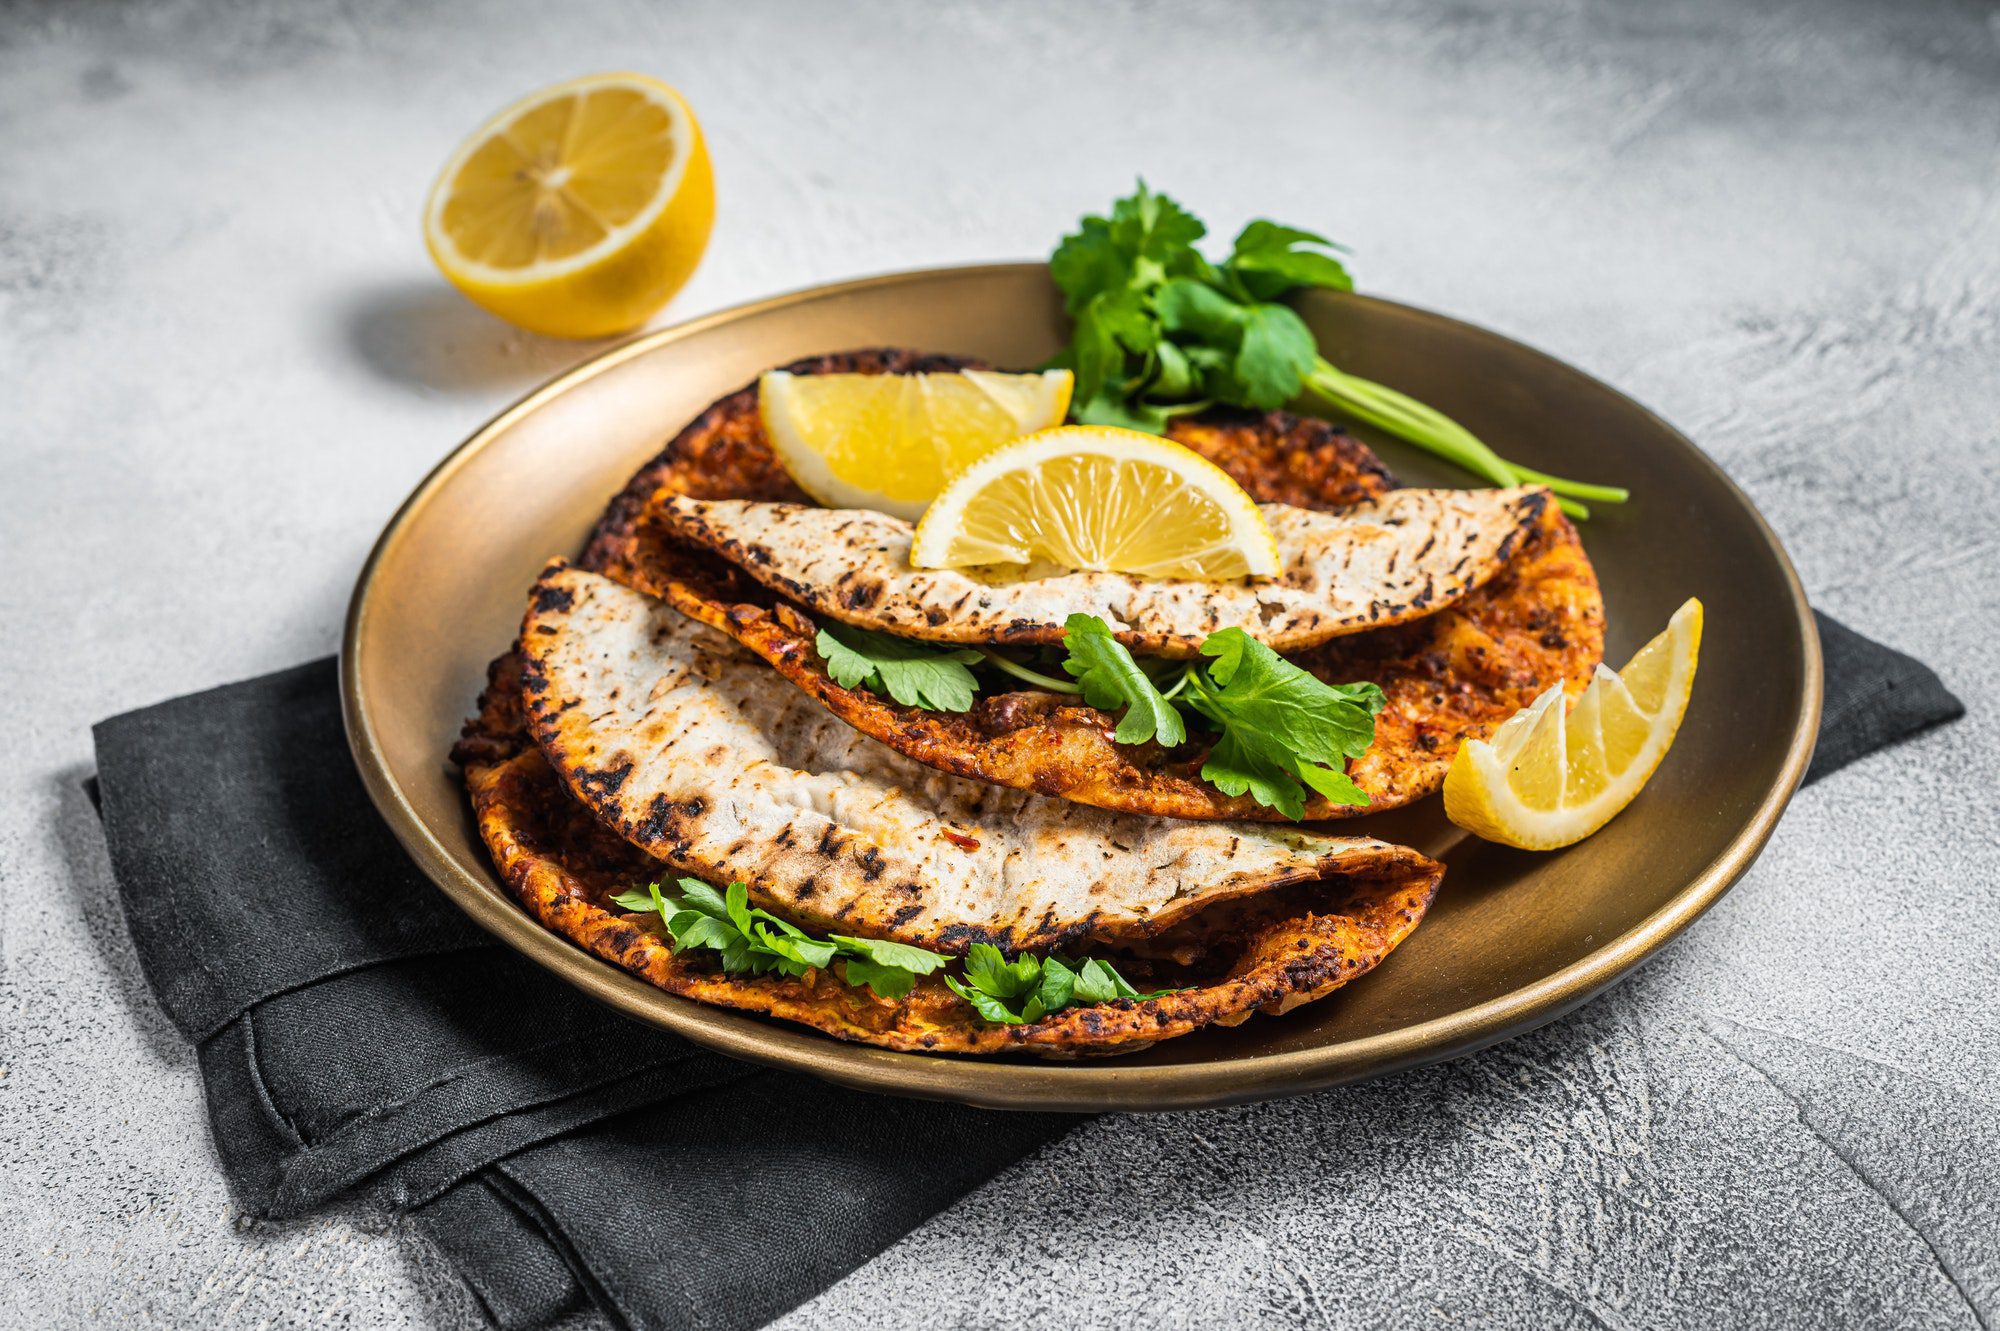 Turkish lahmacun pizza with mince meat and tomatoes on a plate with parsley and lemon.